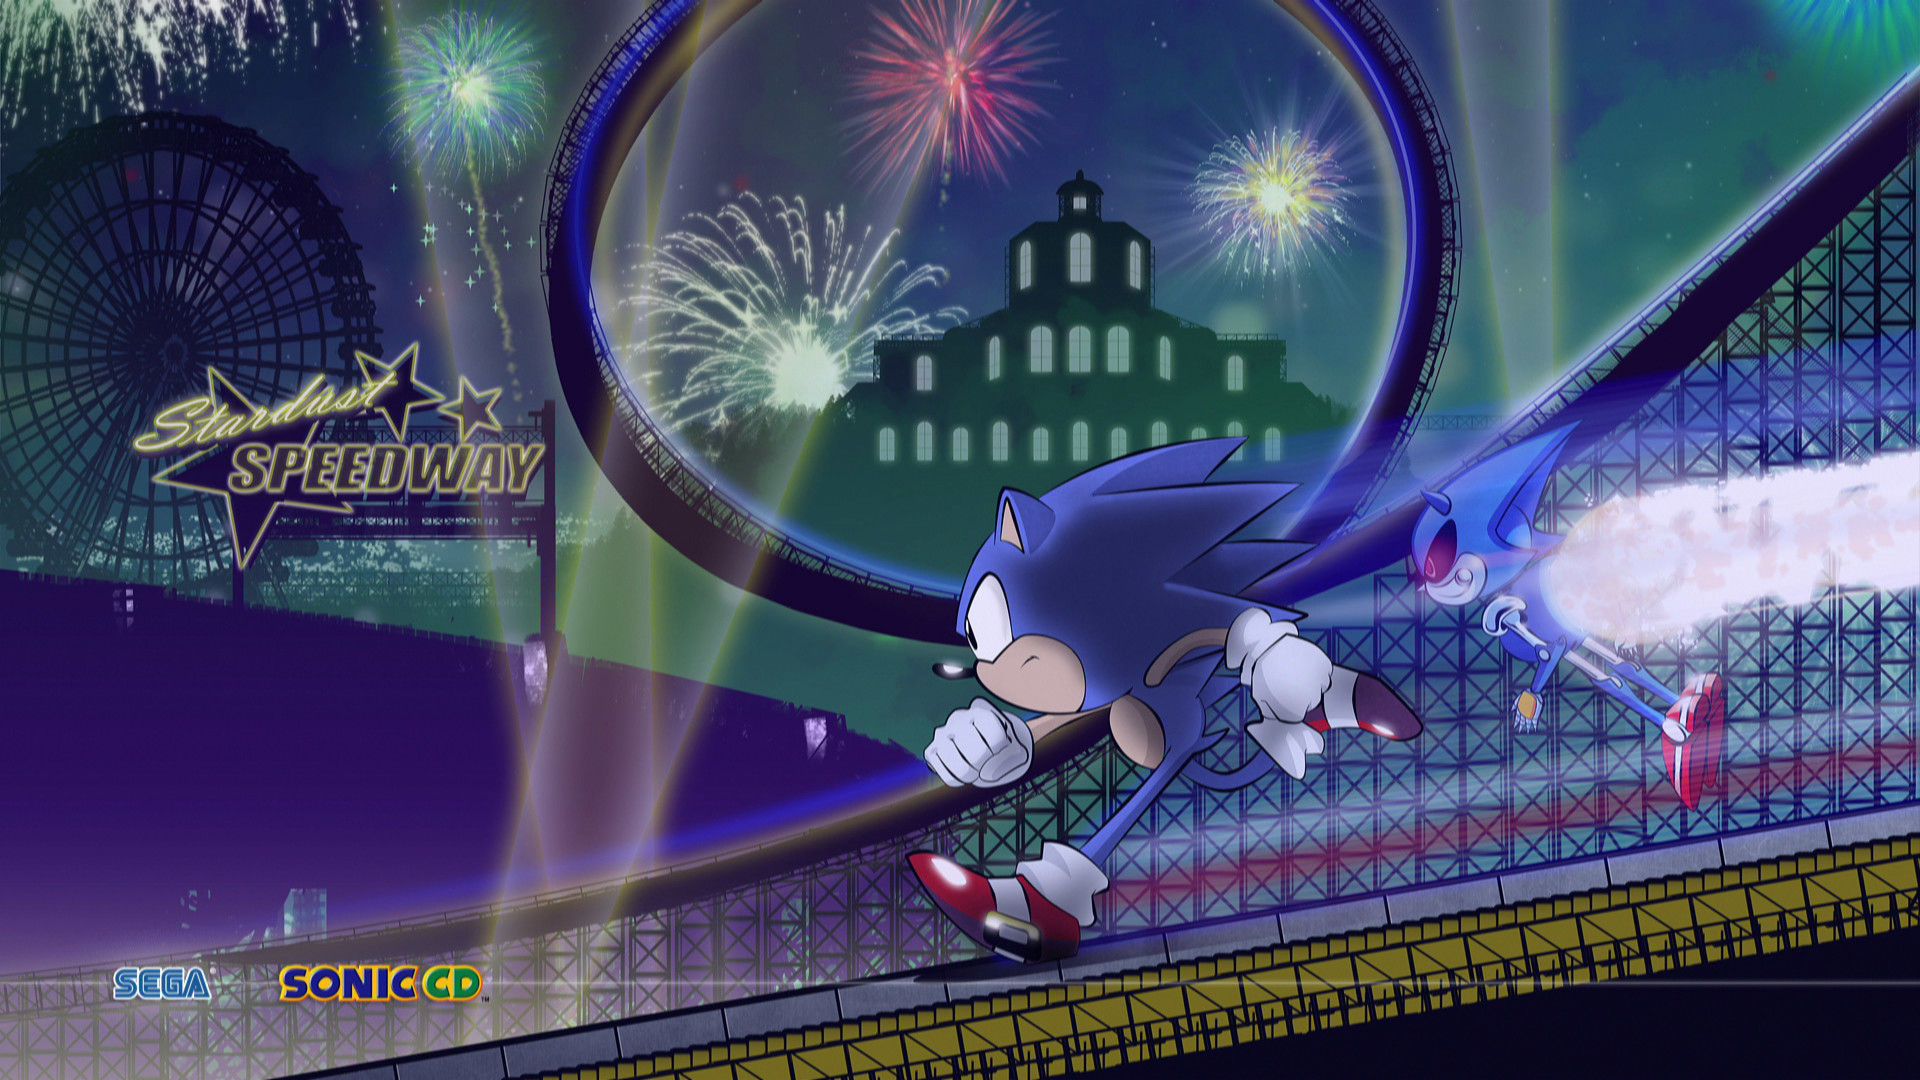 1920x1080 ... 6 sonic cd hd wallpapers backgrounds wallpaper abyss ...